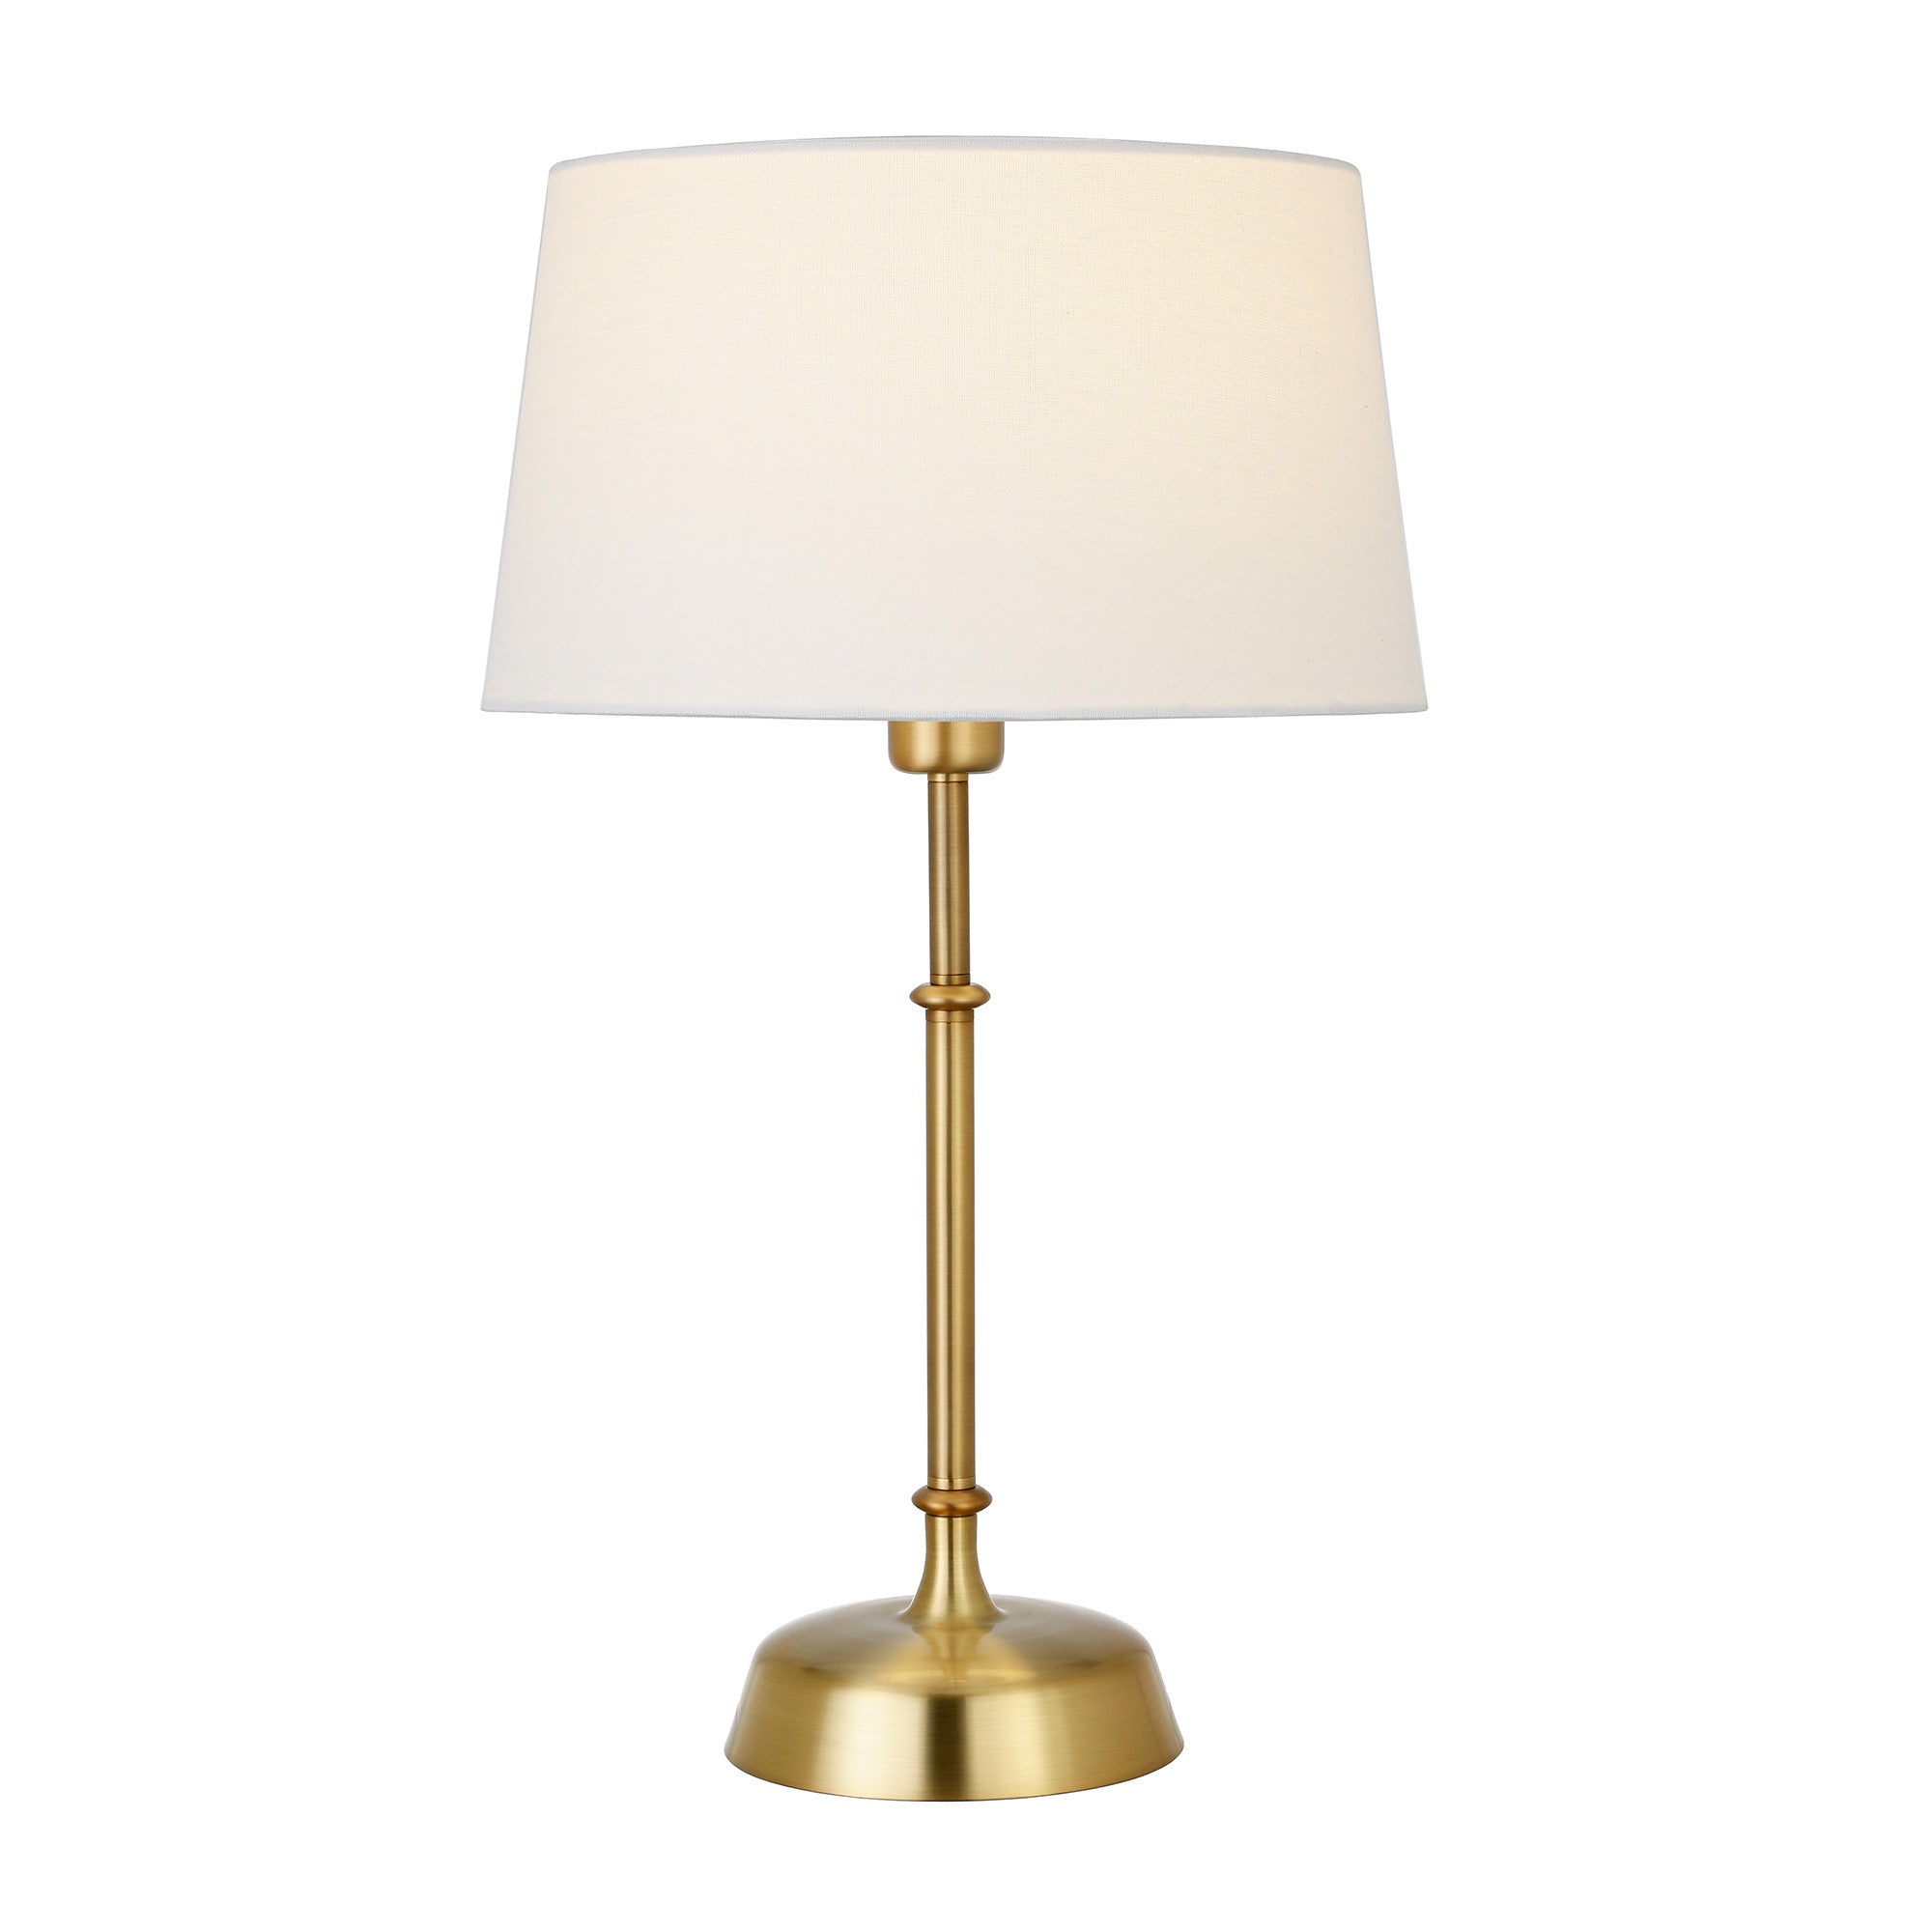 24" Gold Metal Table Lamp With White Drum Shade